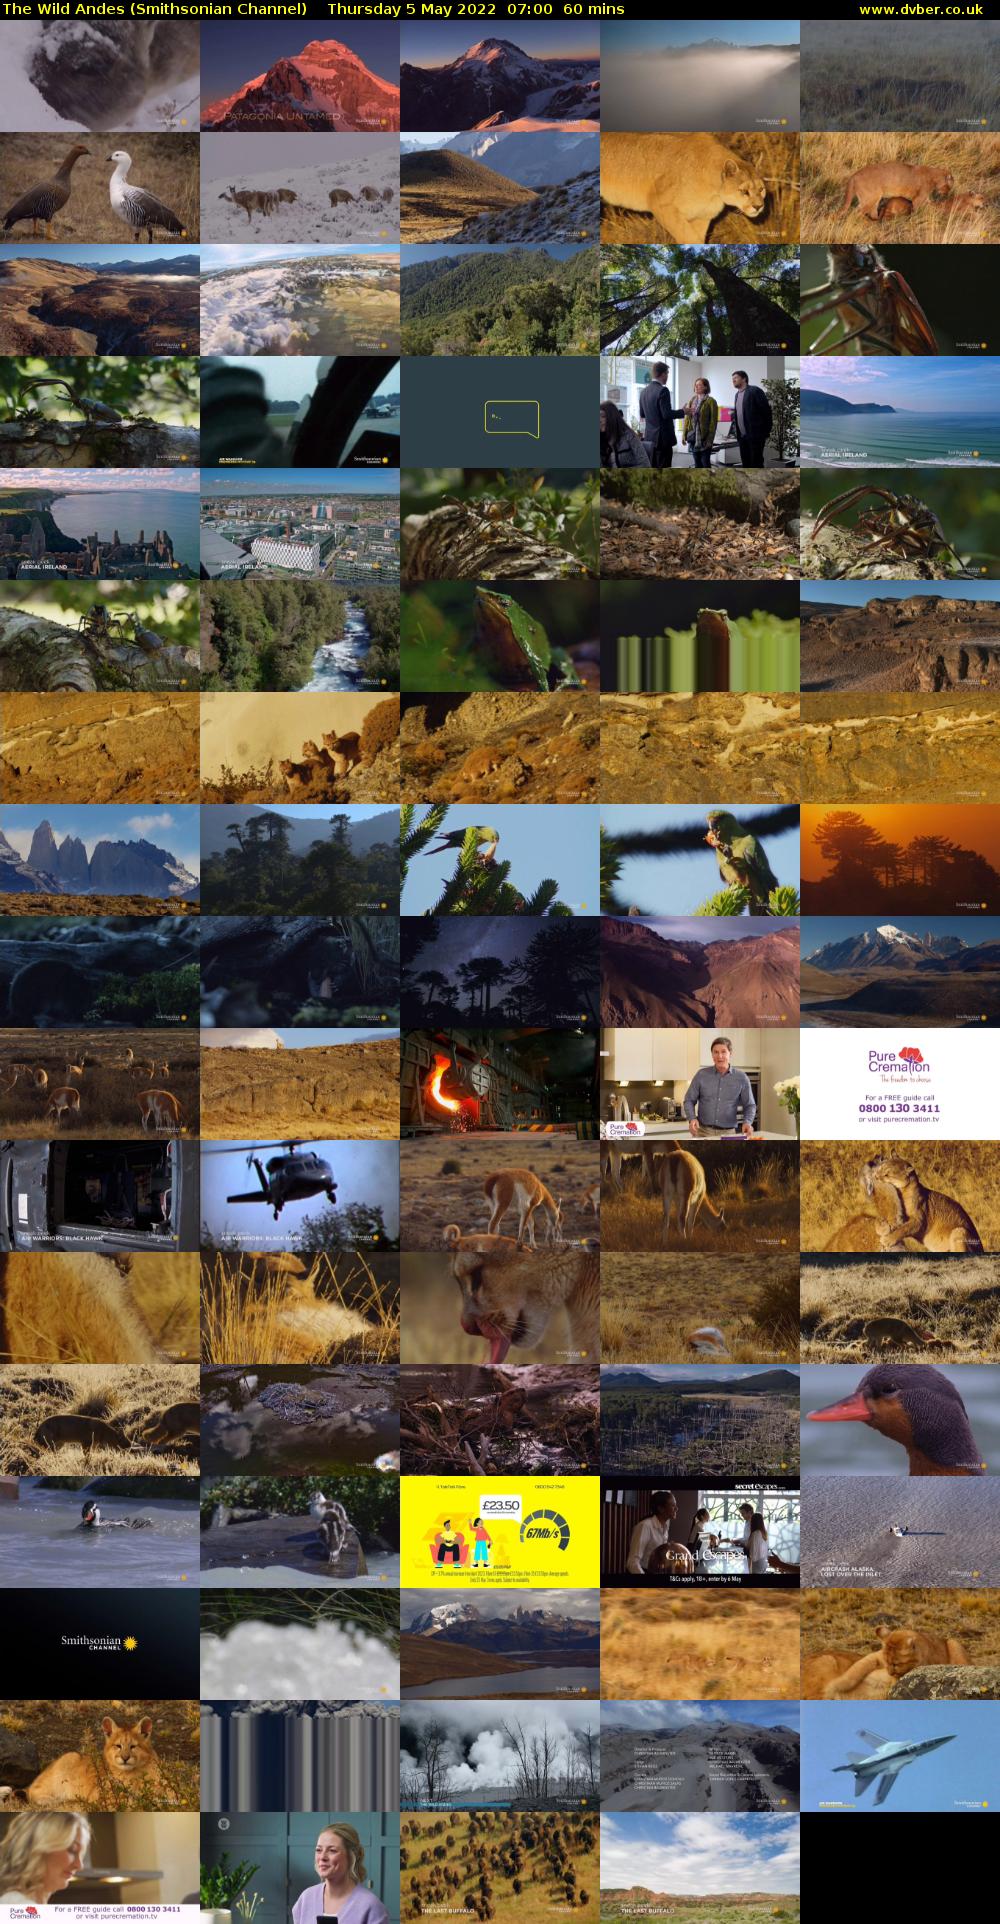 The Wild Andes (Smithsonian Channel) Thursday 5 May 2022 07:00 - 08:00